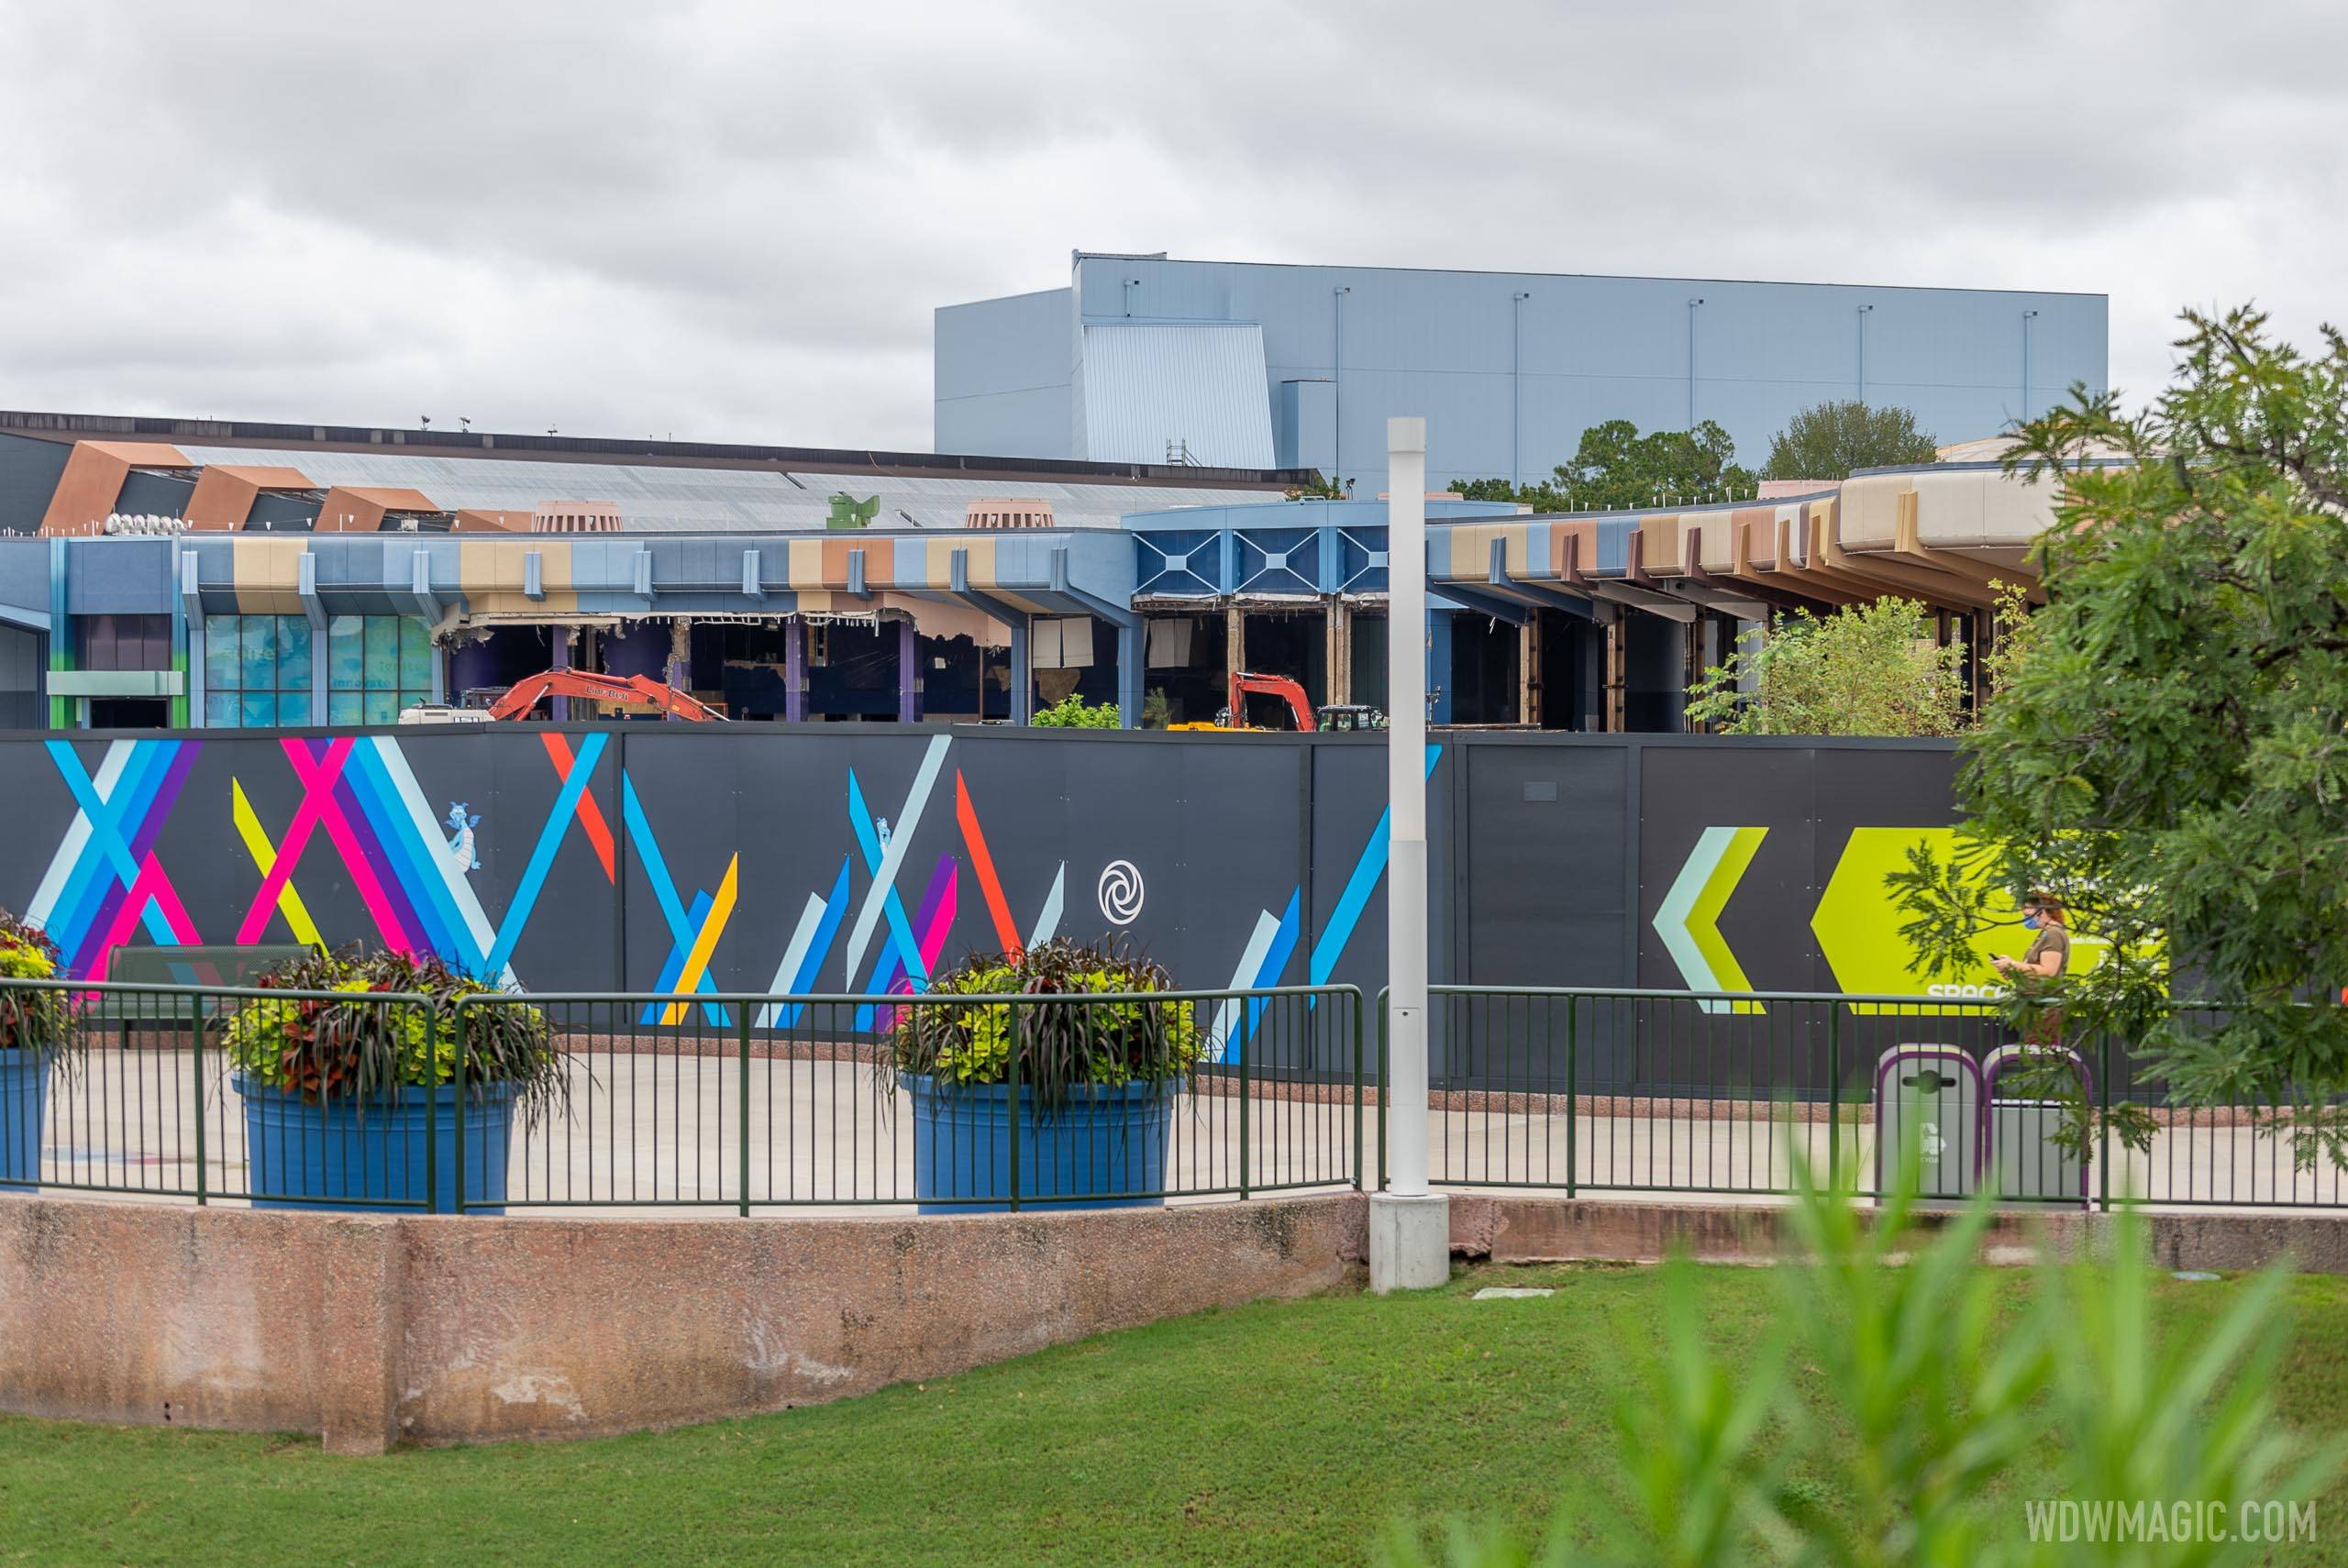 PHOTOS - Mouse Gear, Electric Umbrella and Innoventions North West demolition